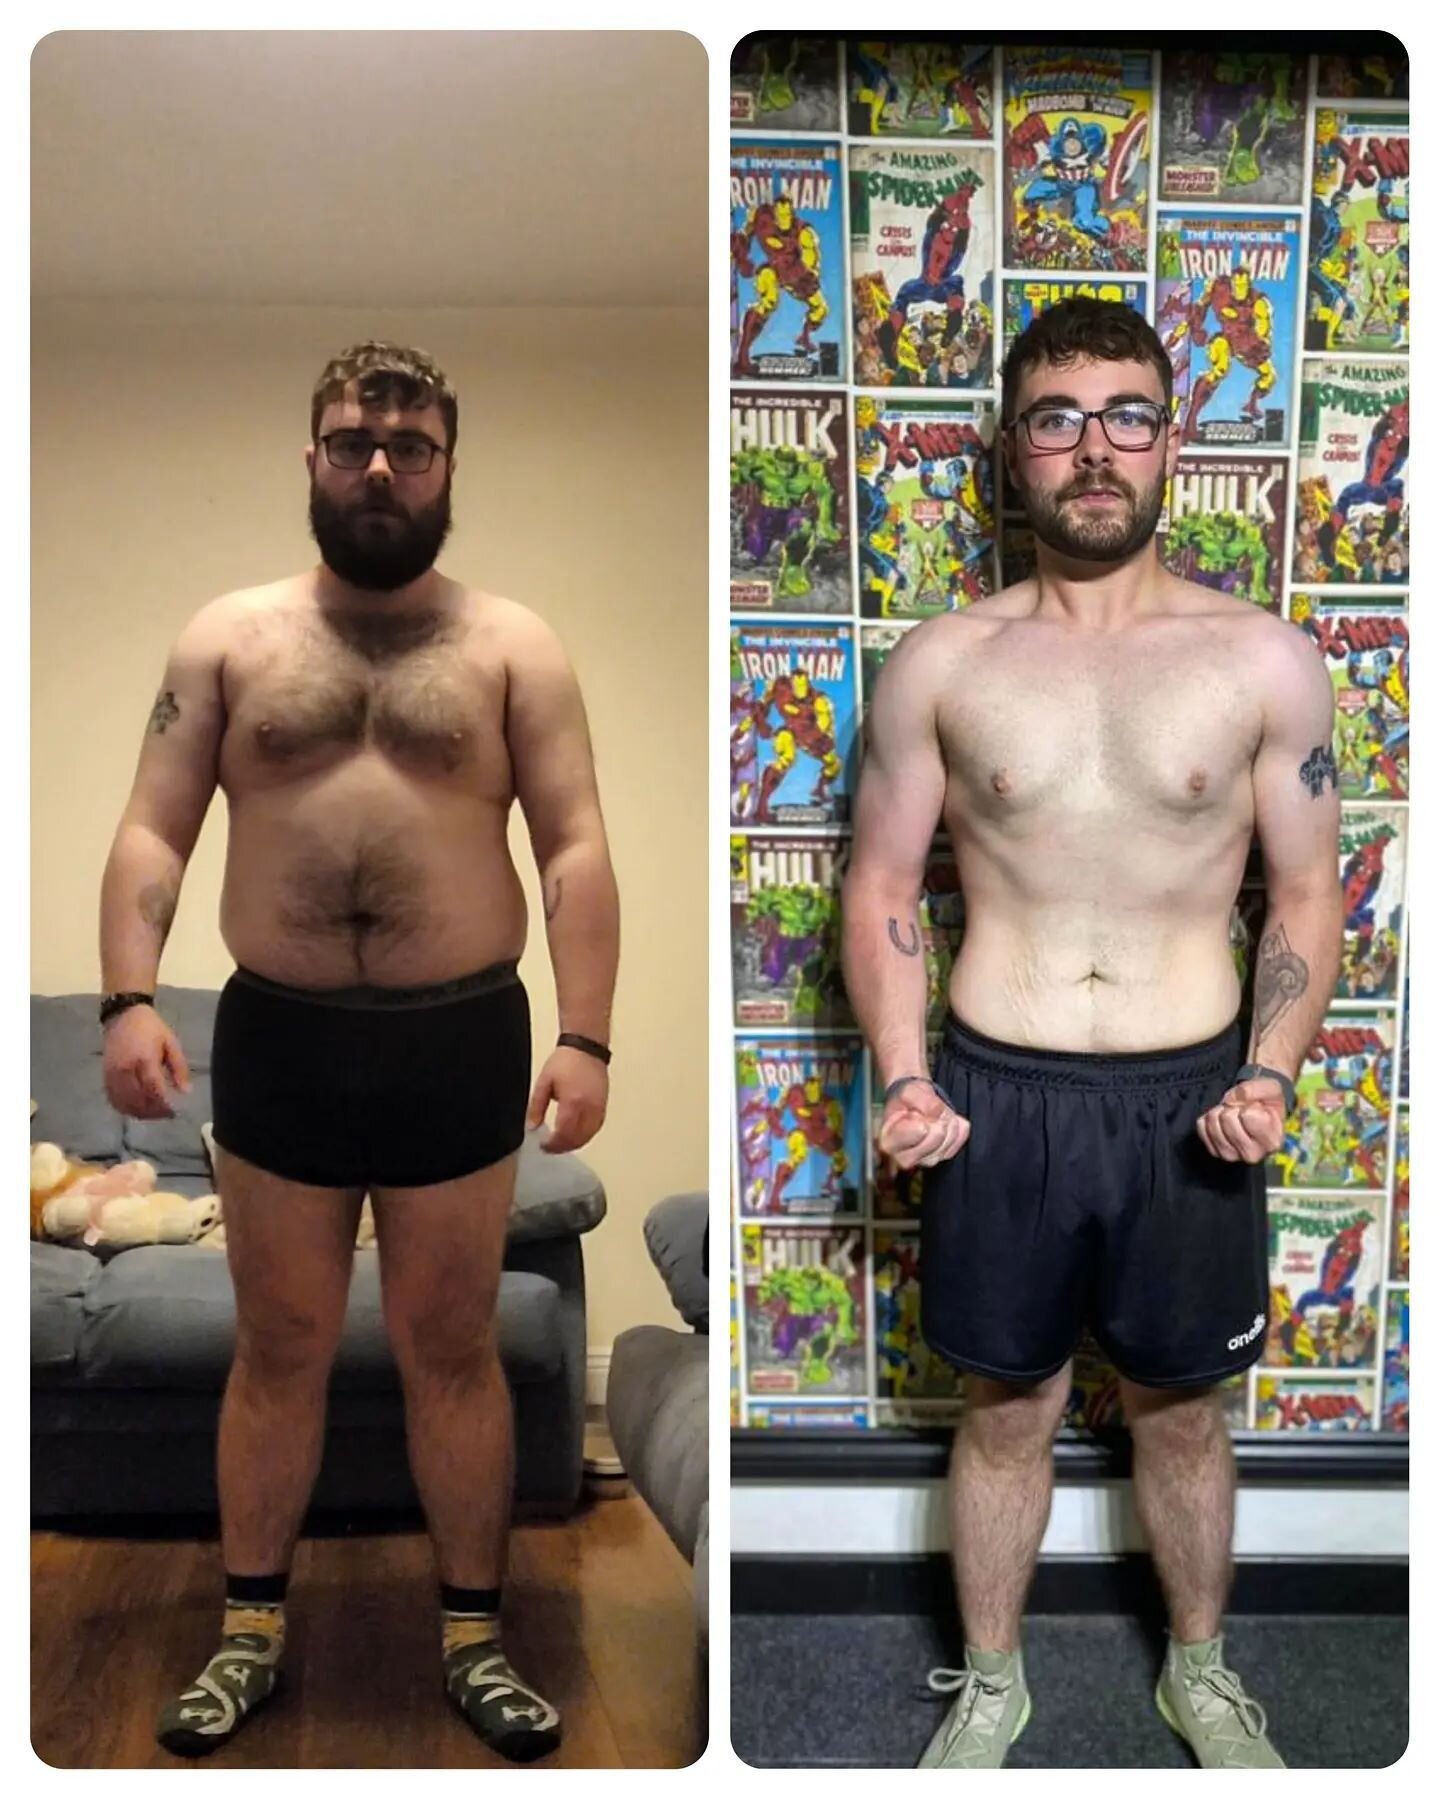 Chapter One ✅

Jan 4th 2021 - 106kg (16st 9lbs) 
Sep 2nd 2021 - 77kg (12st 2lbs)

It's been a hell of journey getting to where I am today and still can't wrap my head around what can be achieved when you put the work in. 

Huge thanks my coach @mcm__